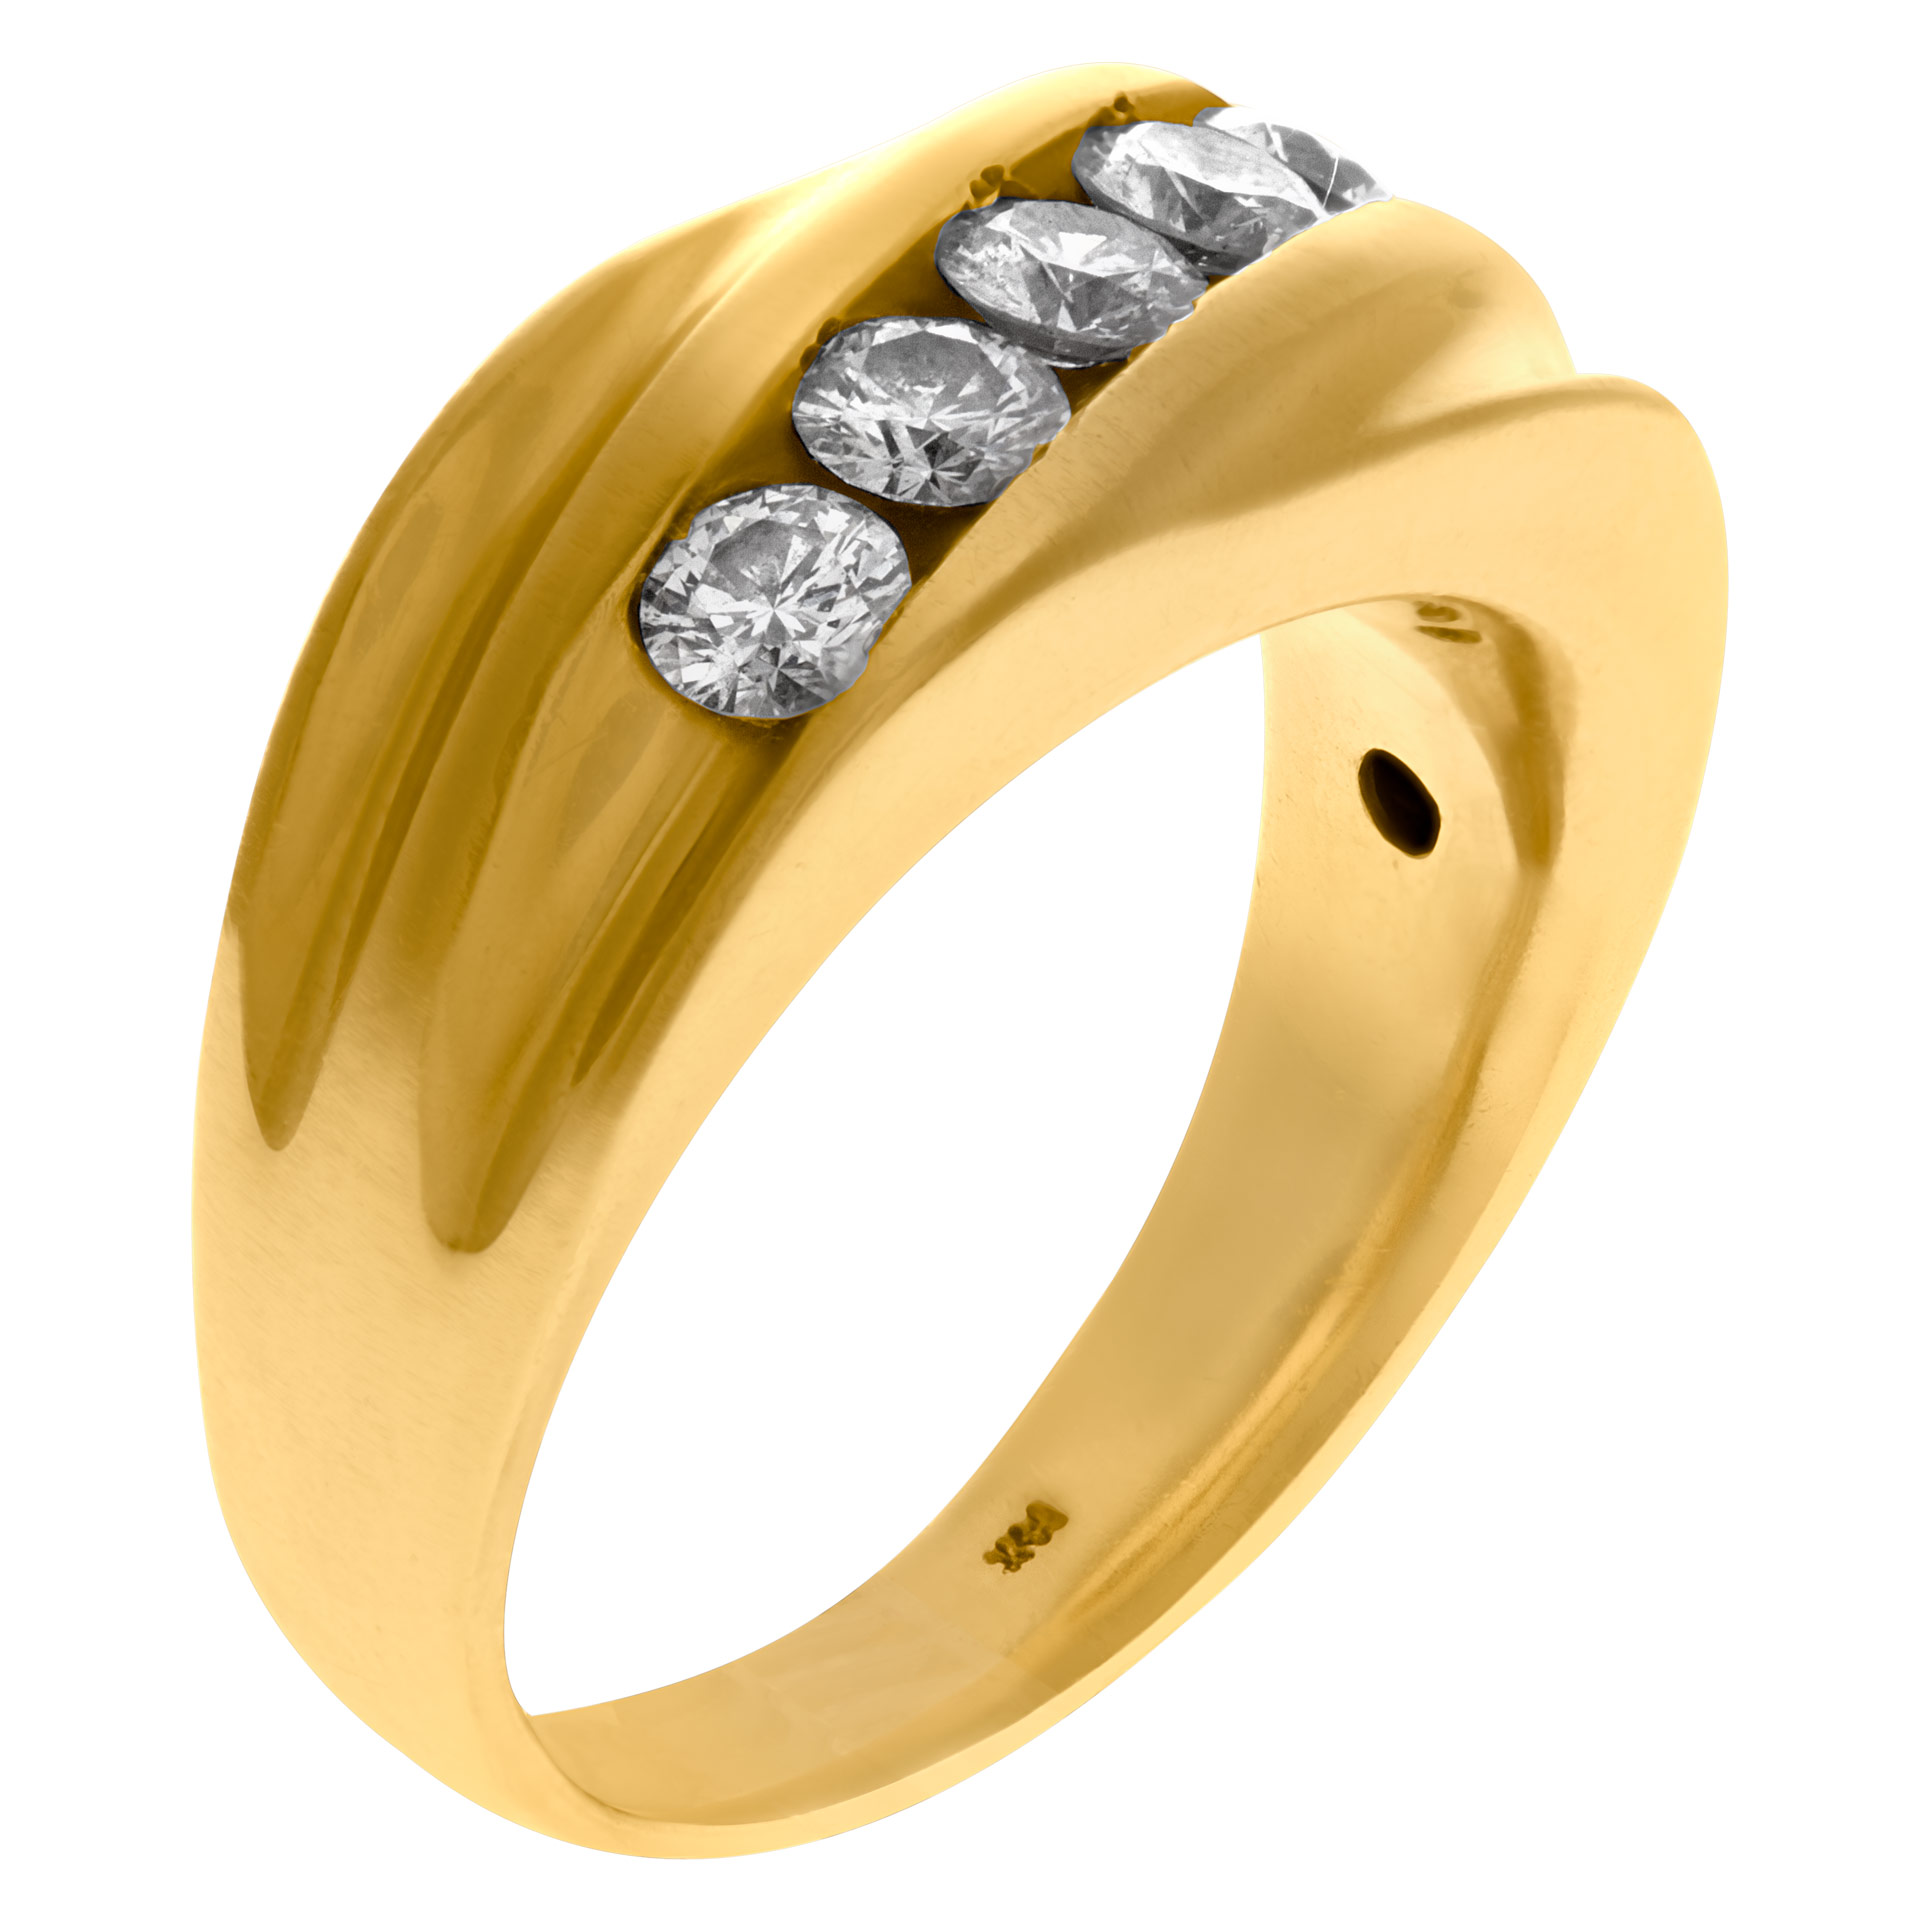 Striking diamond band in 14k yellow gold with 5 diamonds approximately 1.25 carats image 2